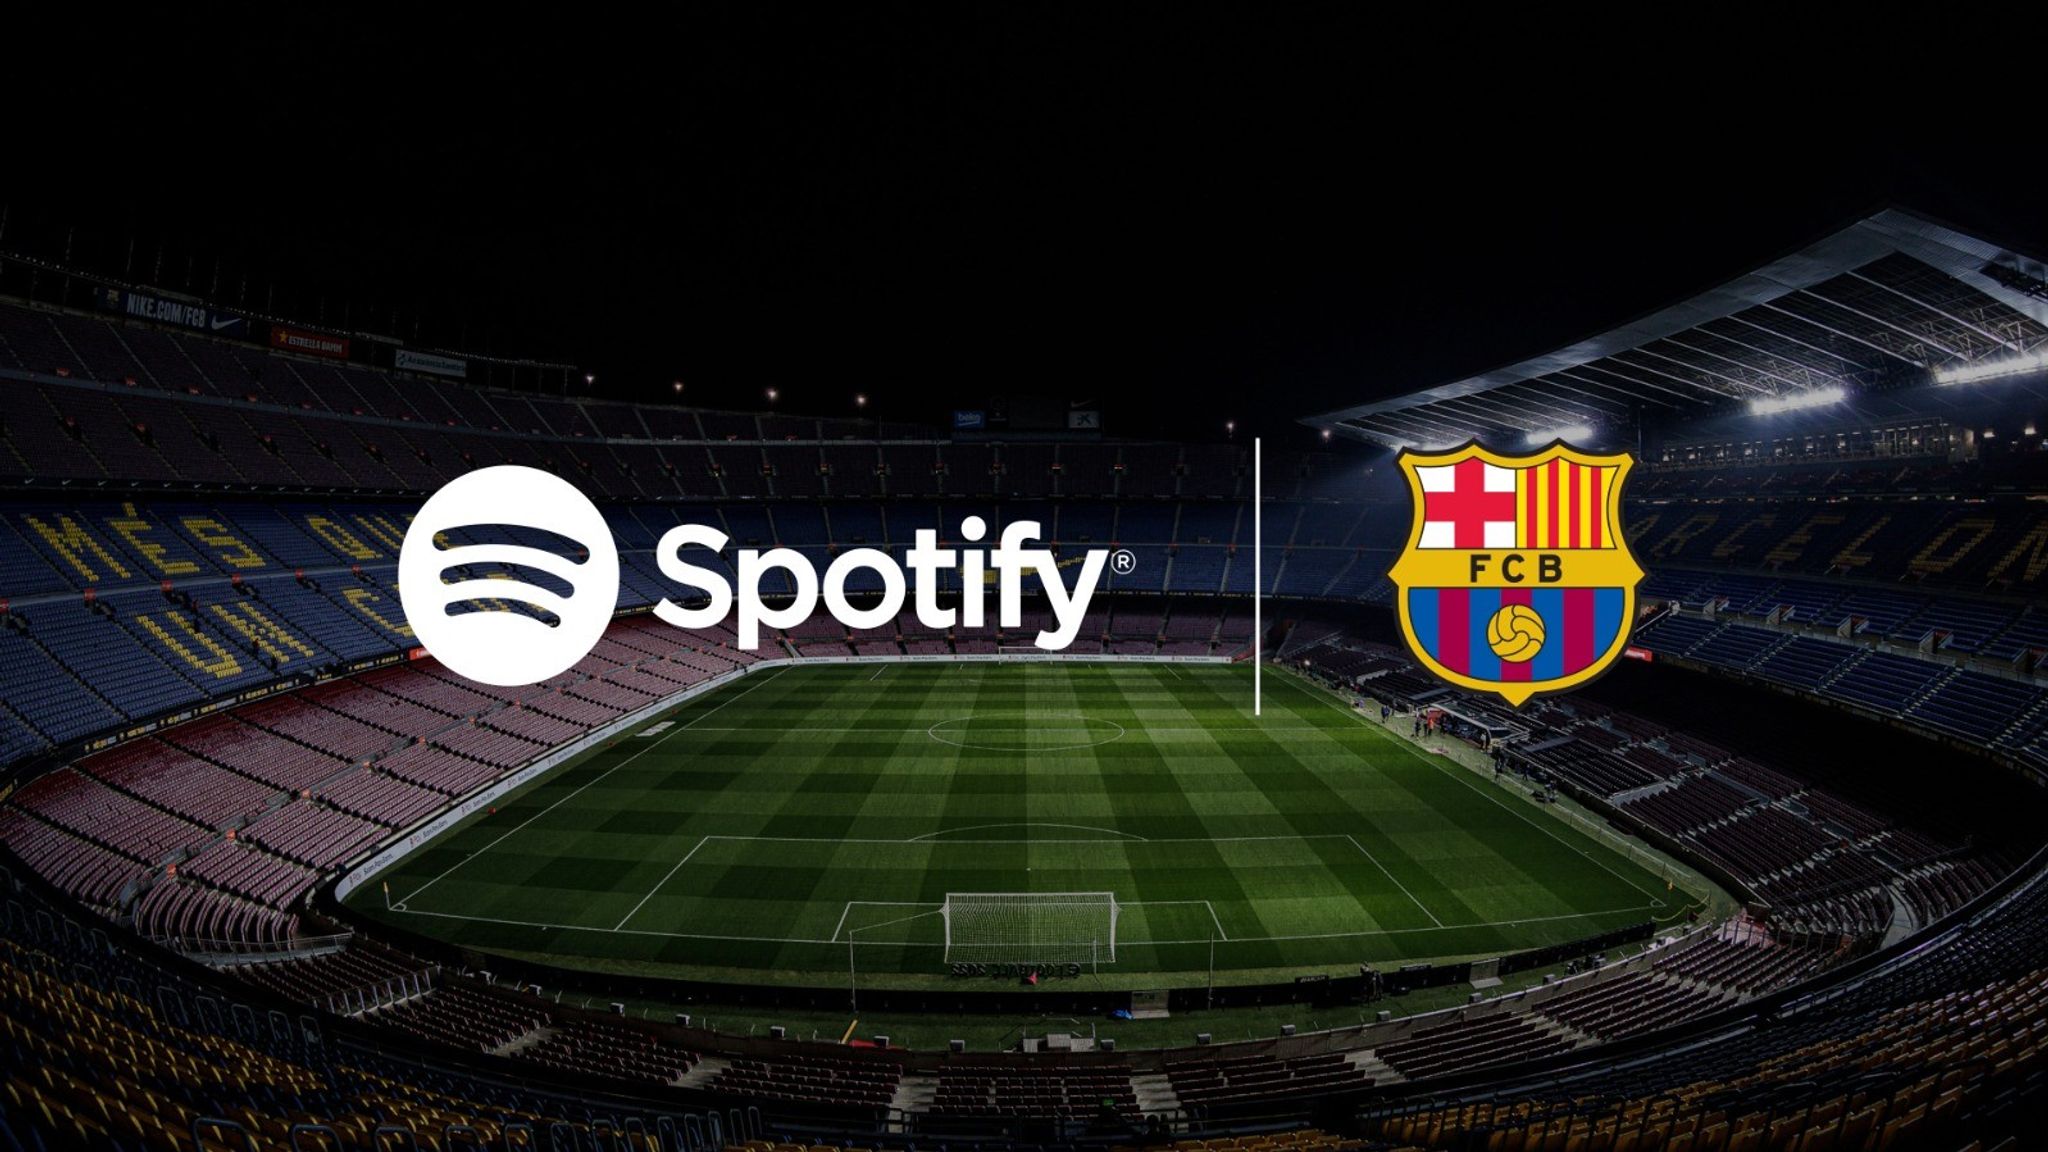 Barcelona to be sponsored by Spotify from 2022/23 season in deal including Nou Camp naming rights Football News Sky Sports